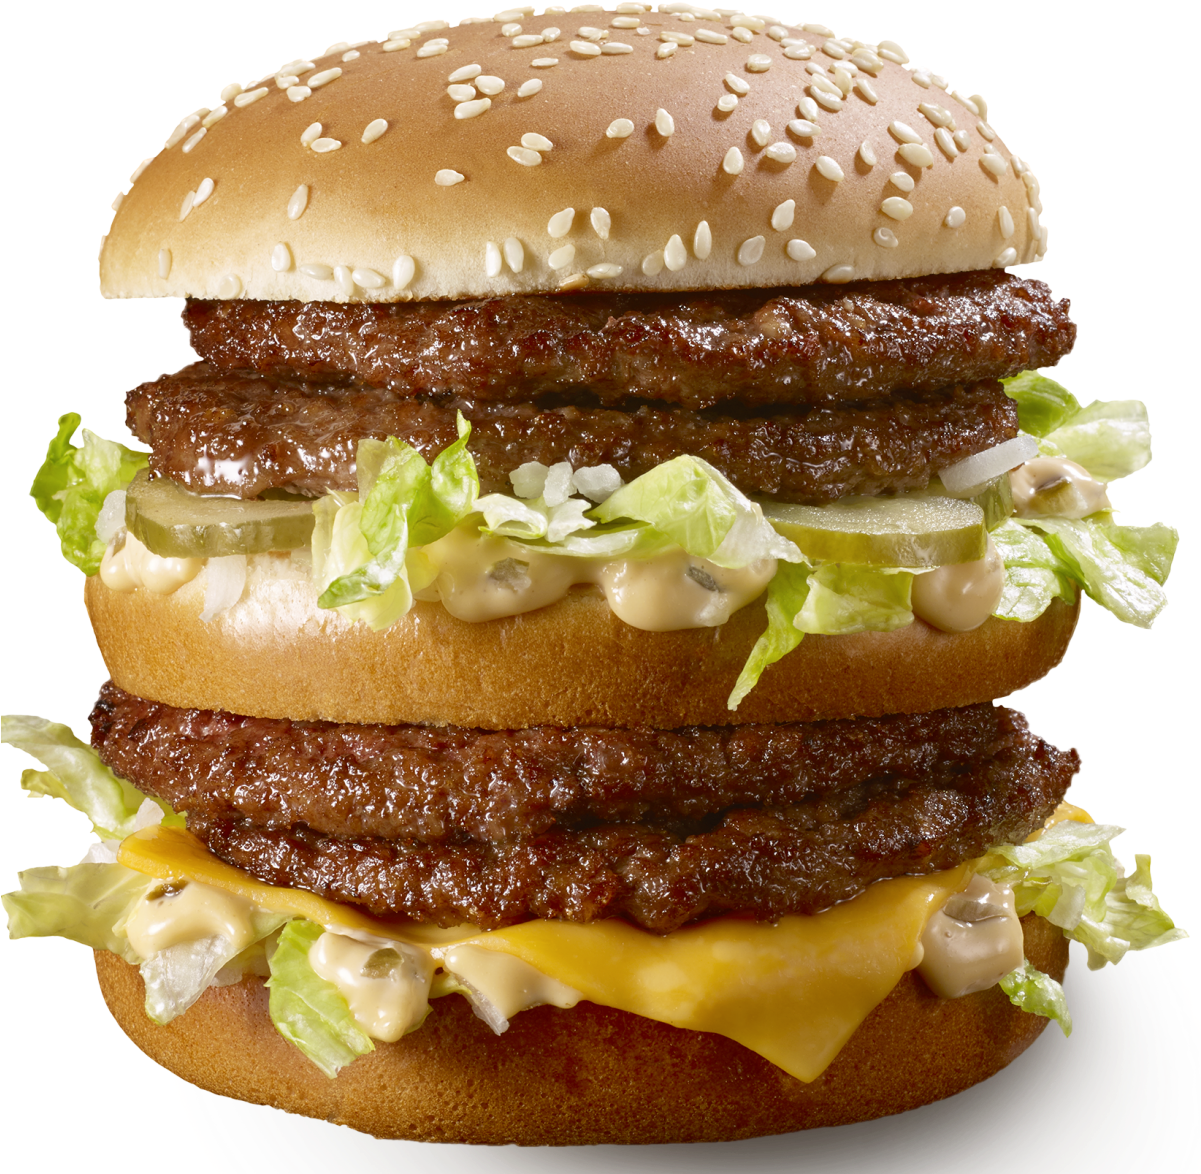 A Double Cheeseburger With Multiple Patties